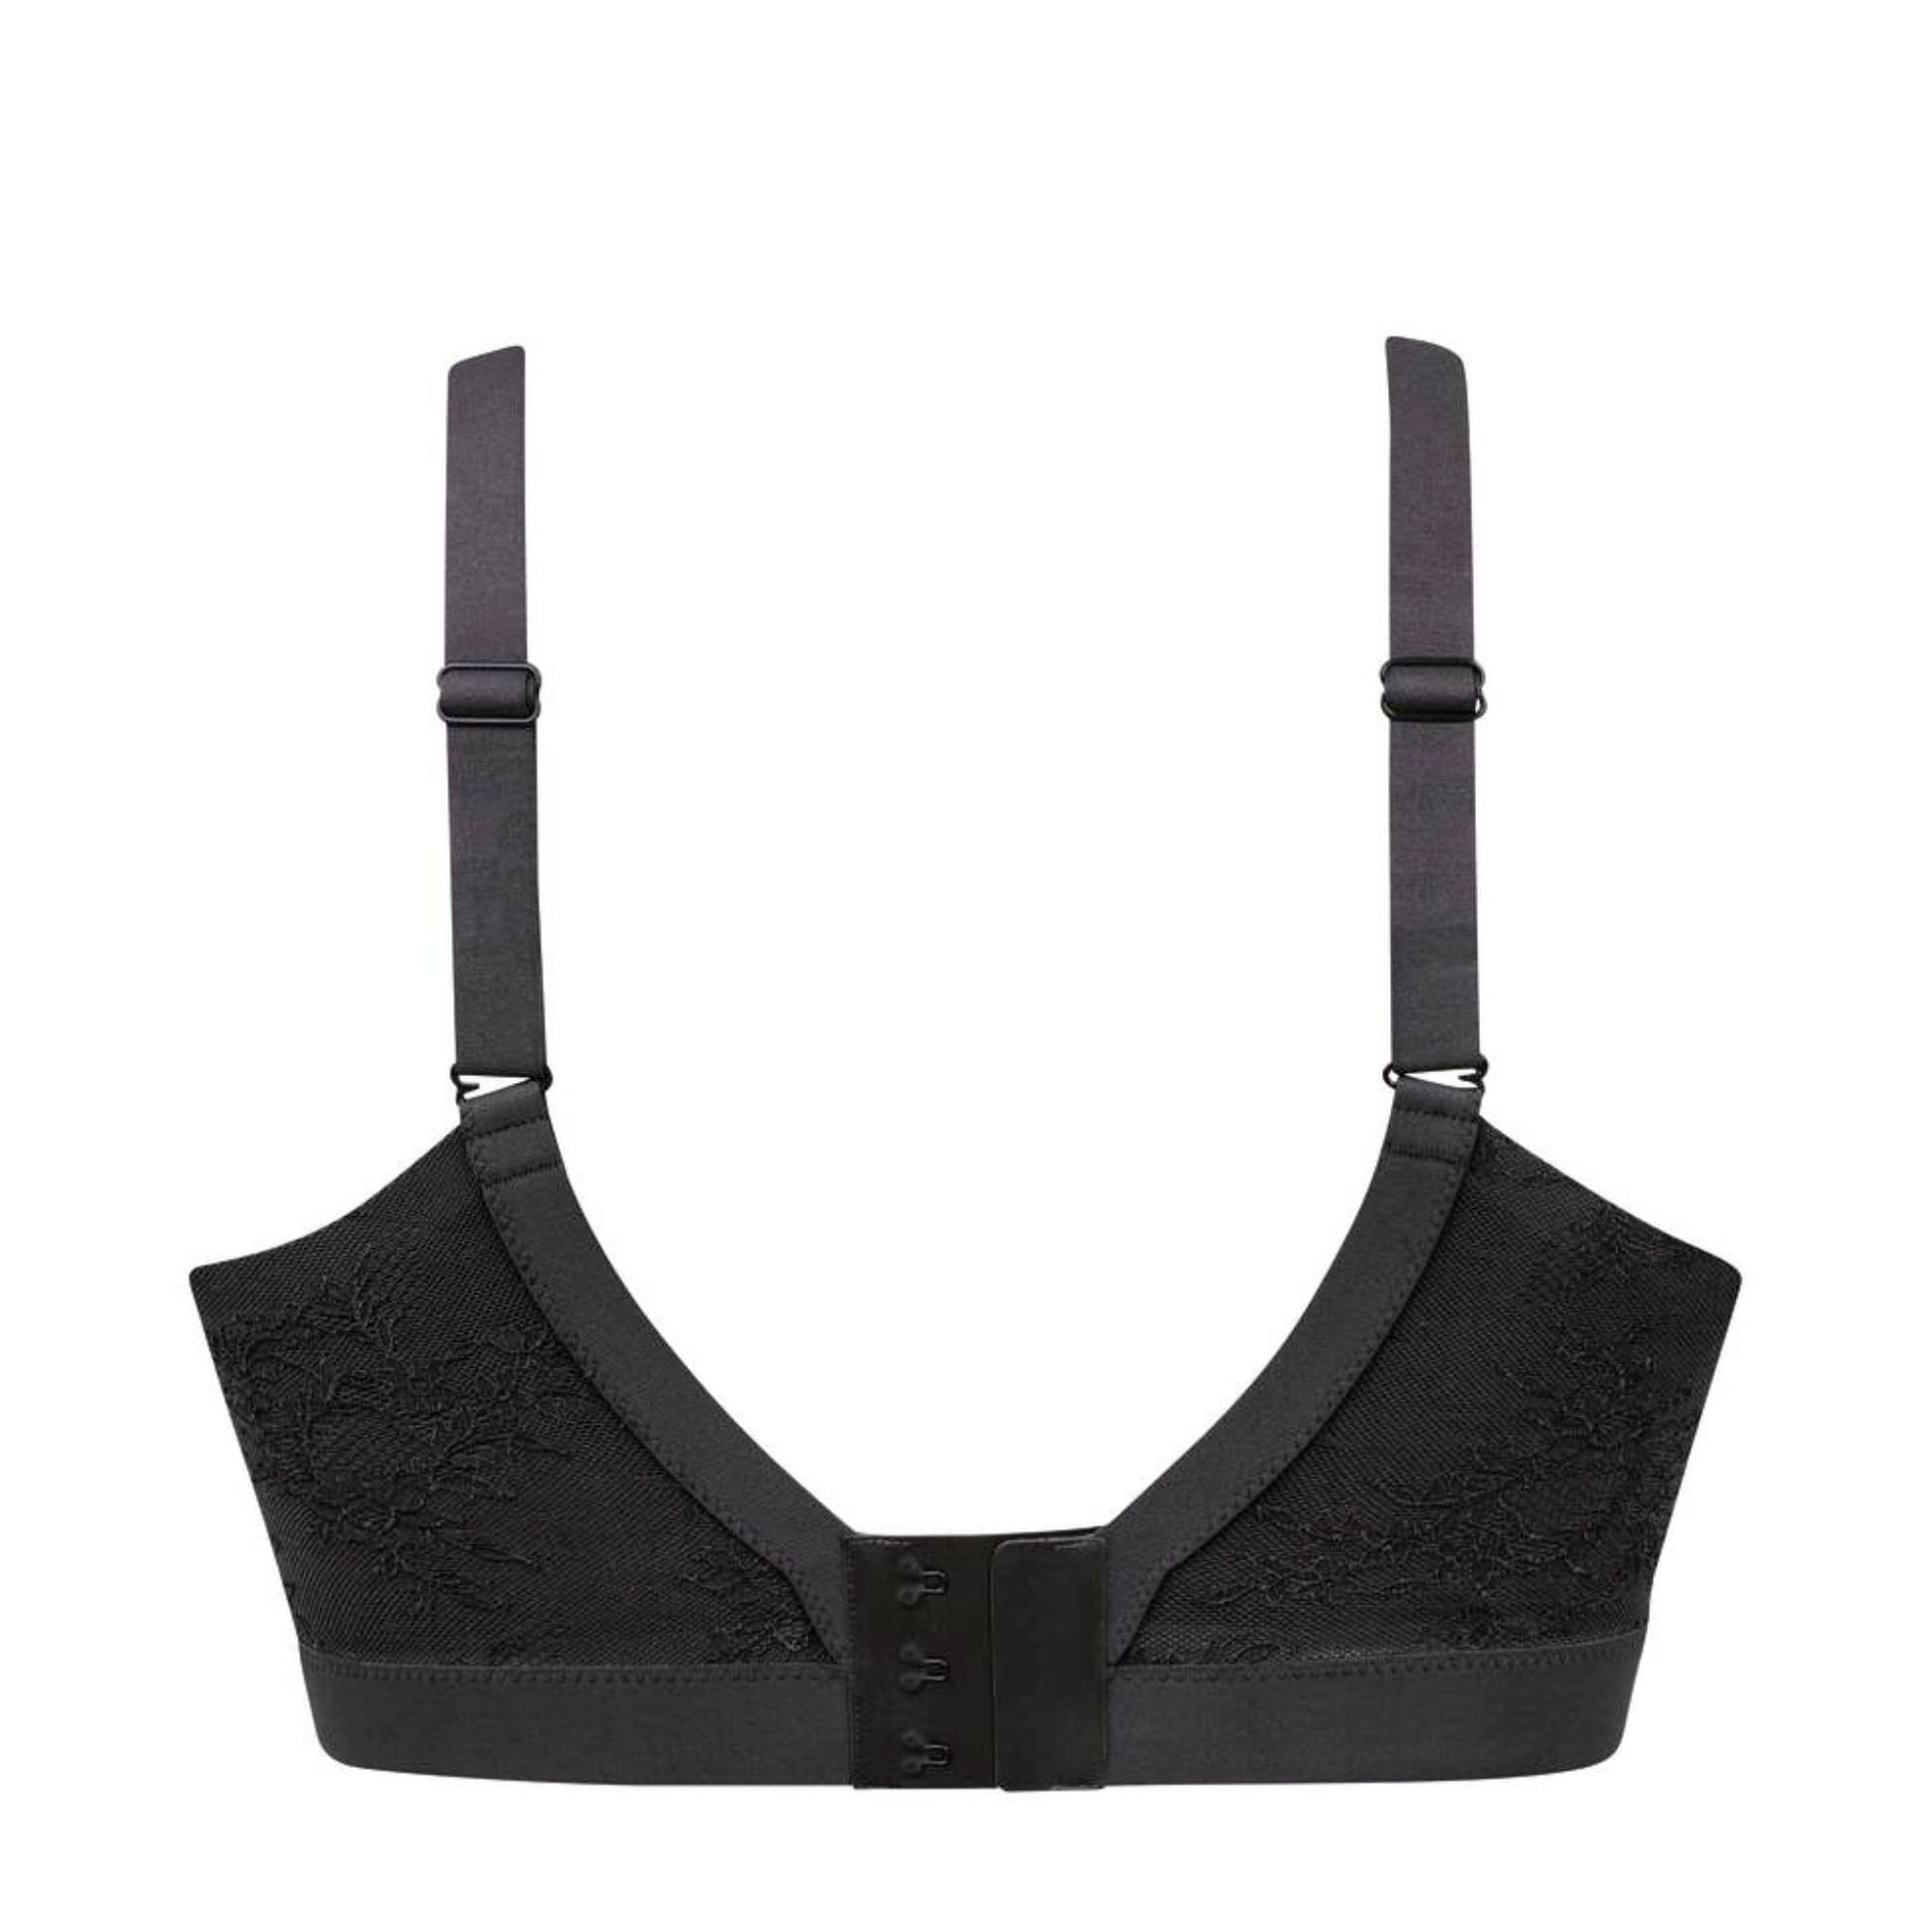 Essential Lace Amnings Bralette Anthracite